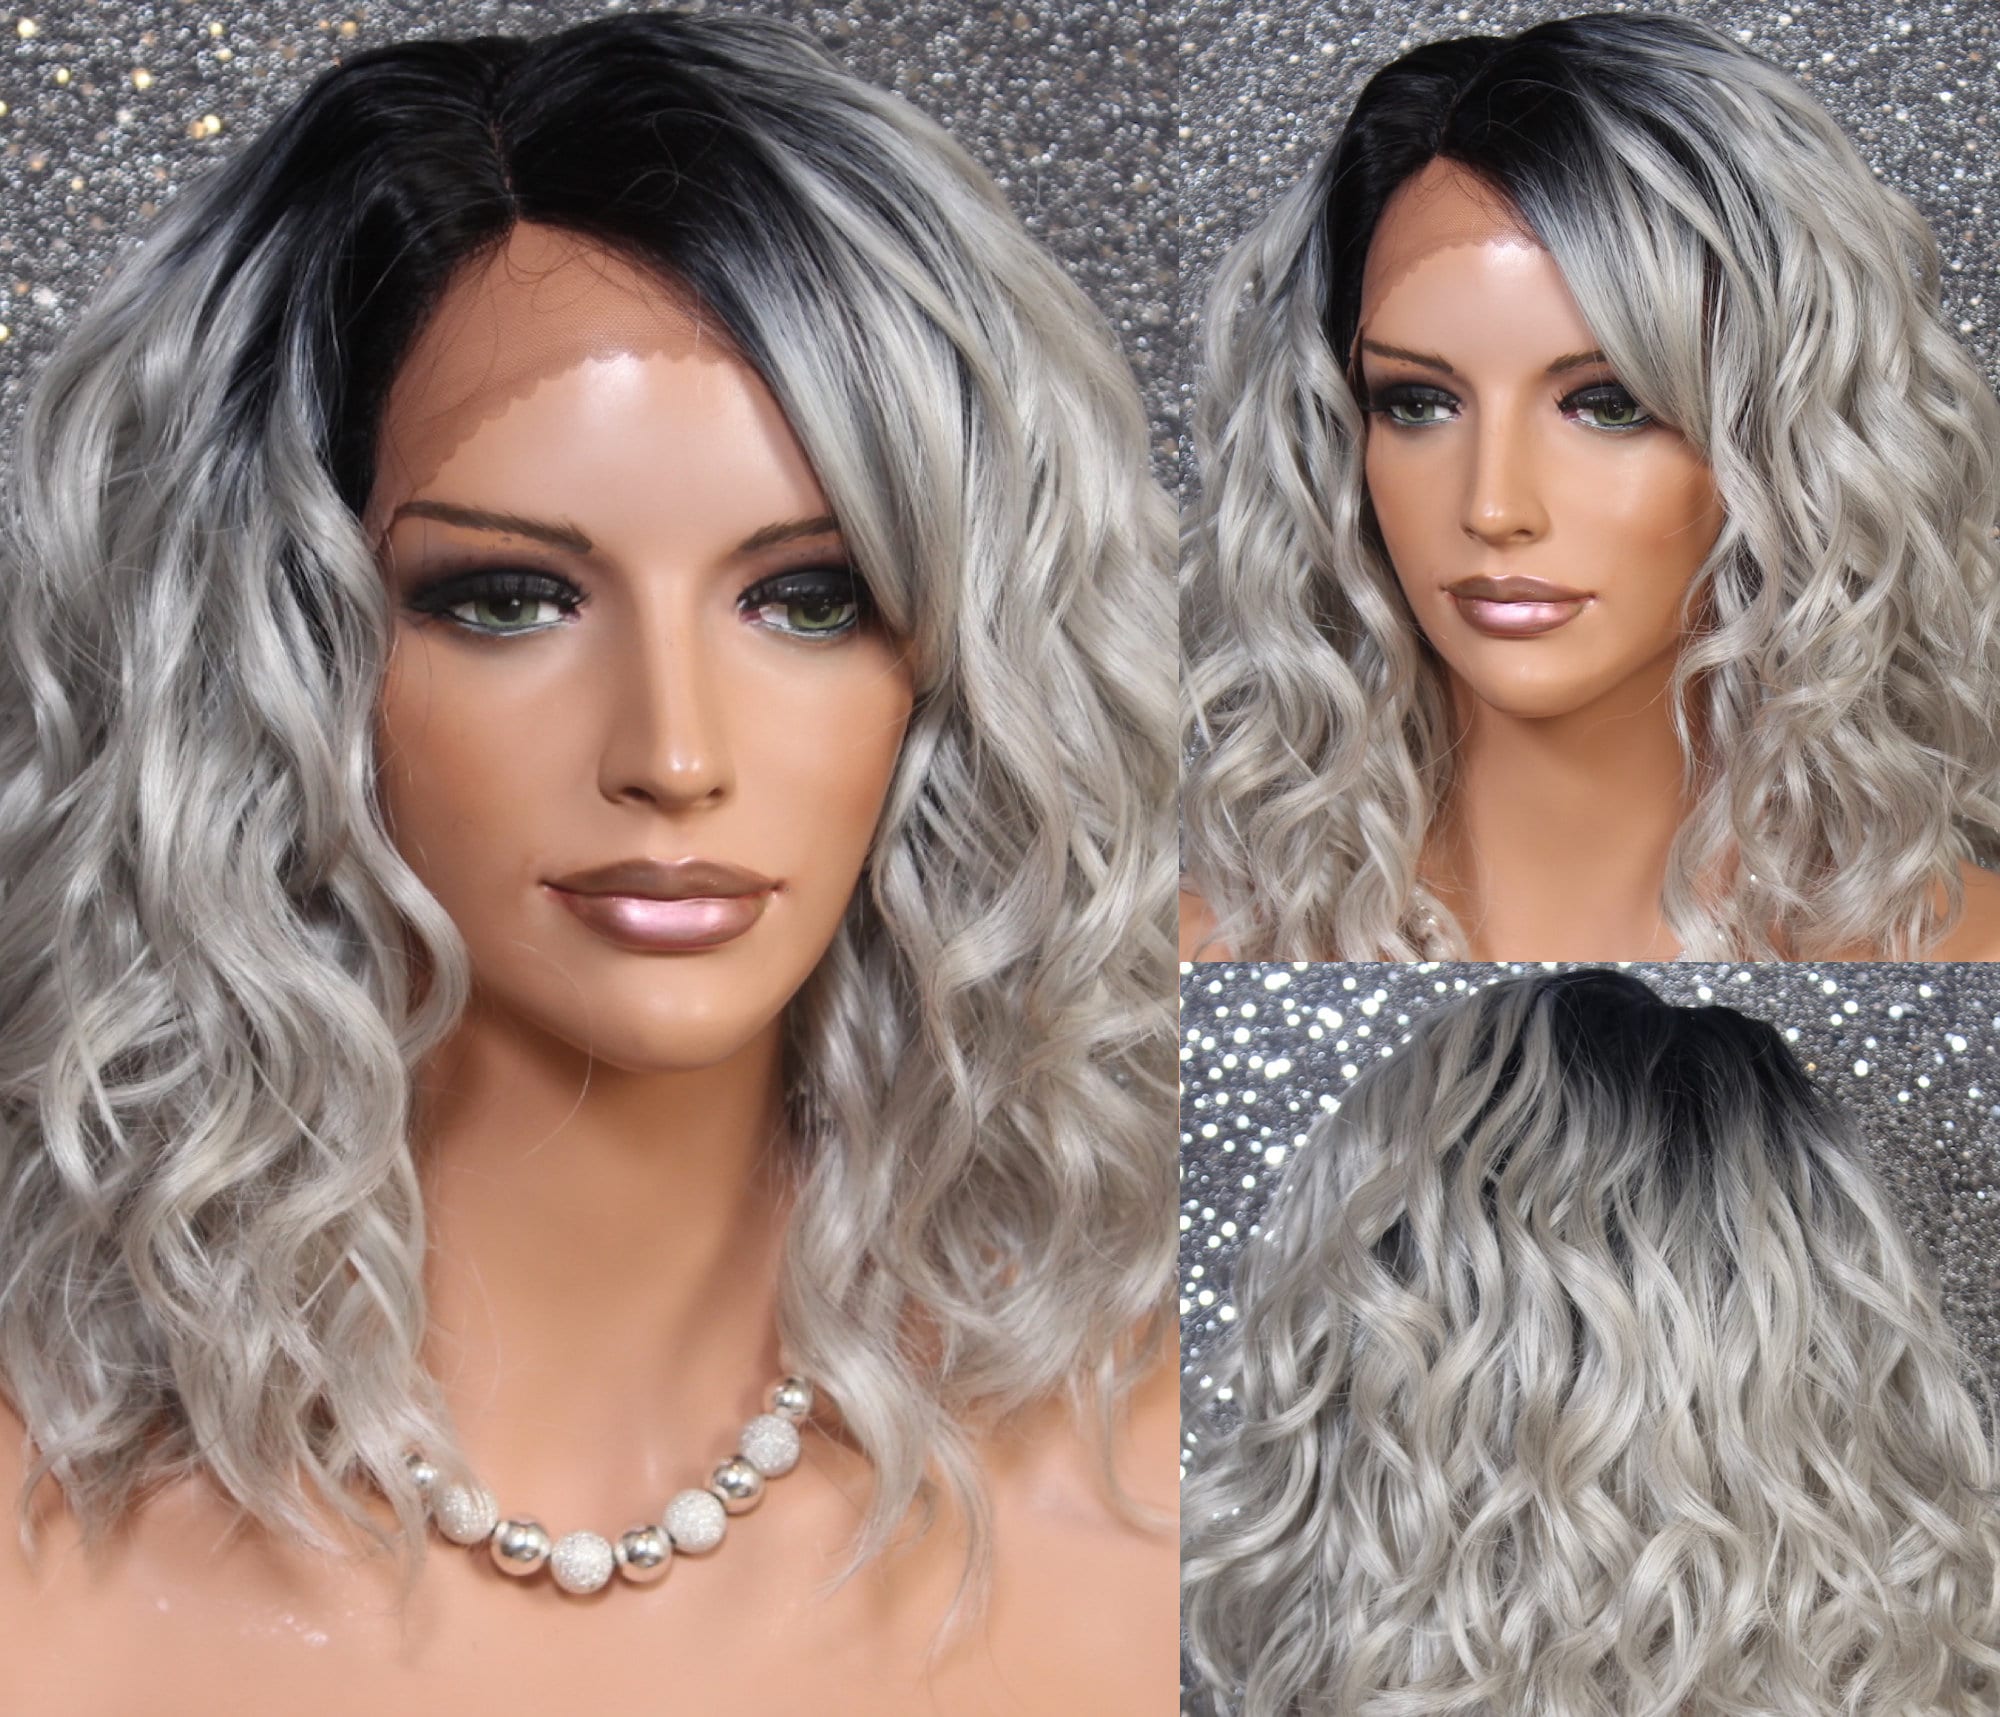 Natural Human Hair Blend Full Lace Front Wig With Side Lace Parting Beautiful Beachy Wavy Soft Texture Grey Silver Dk Roots